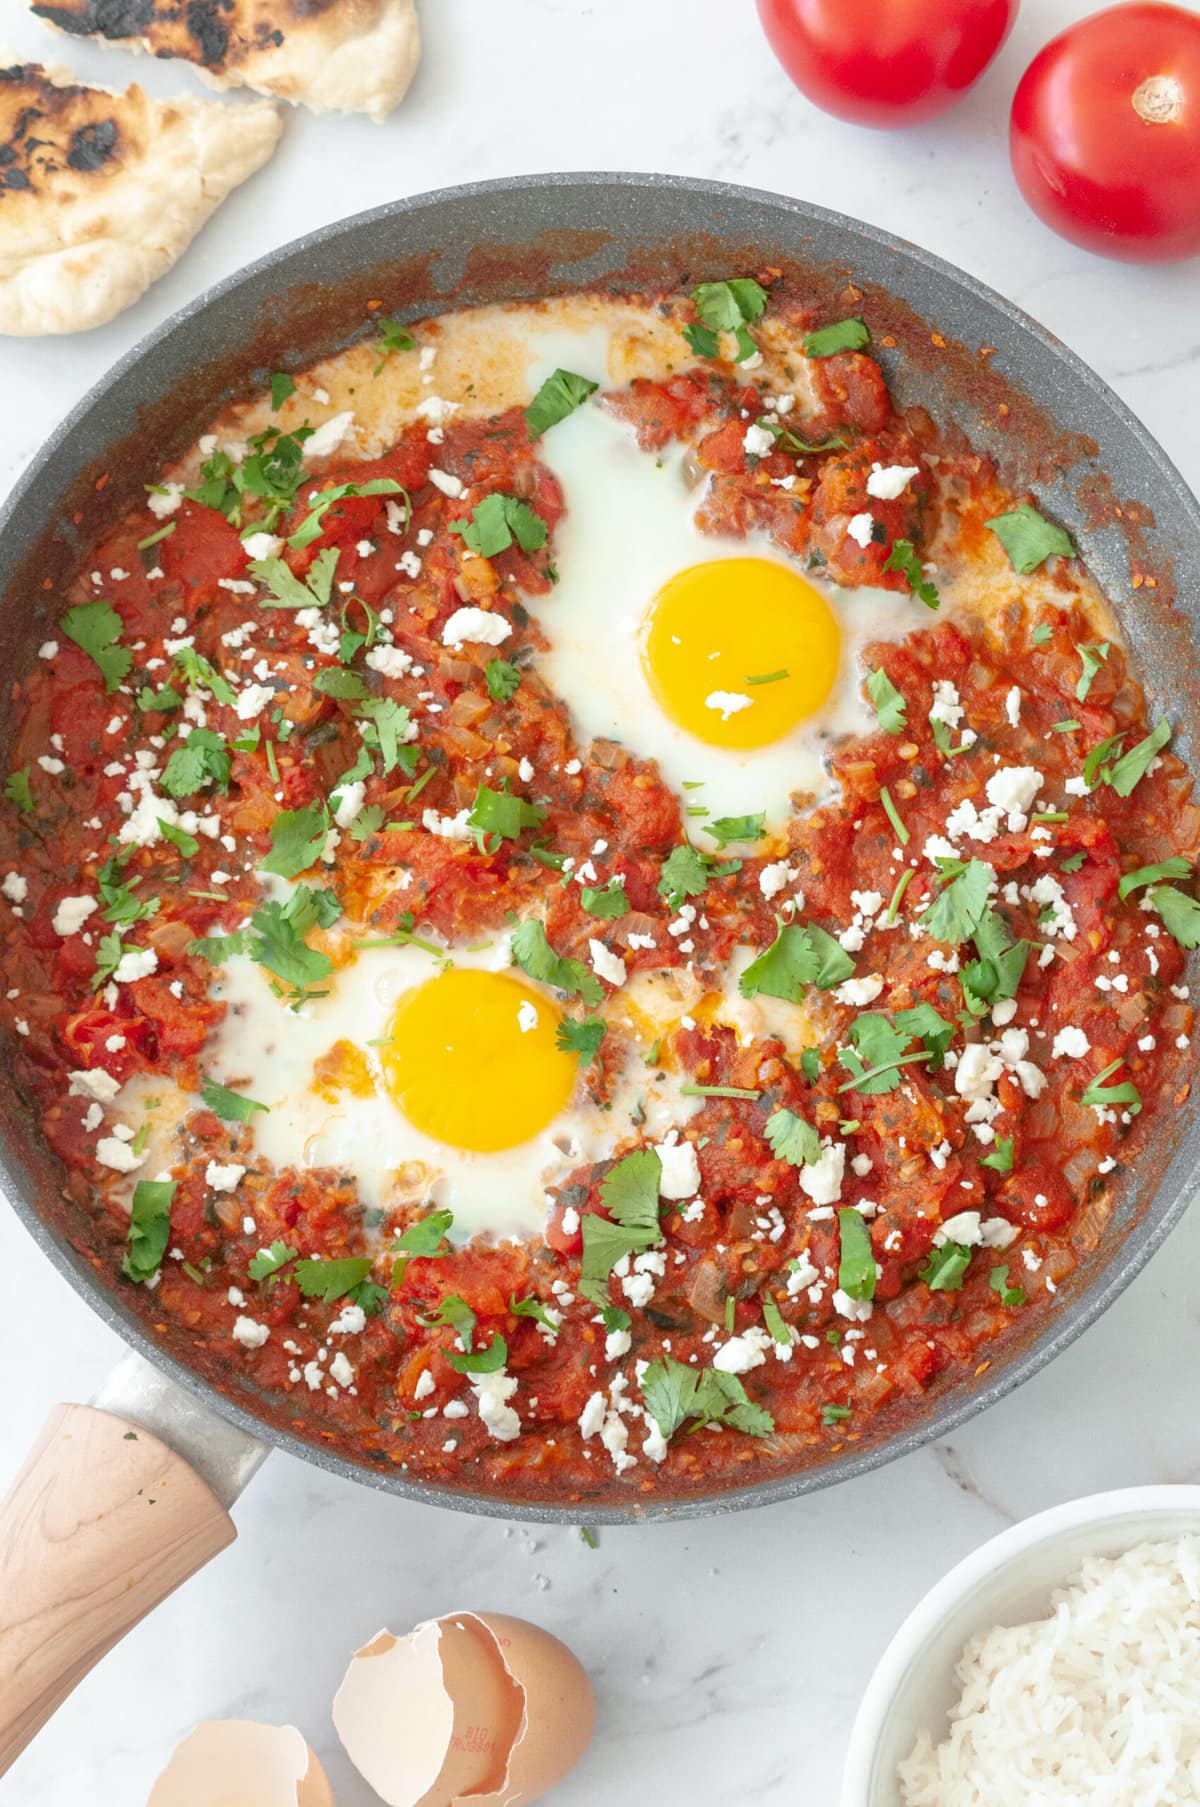 Shakshuka in a frying pan with tomatoes and eggs.